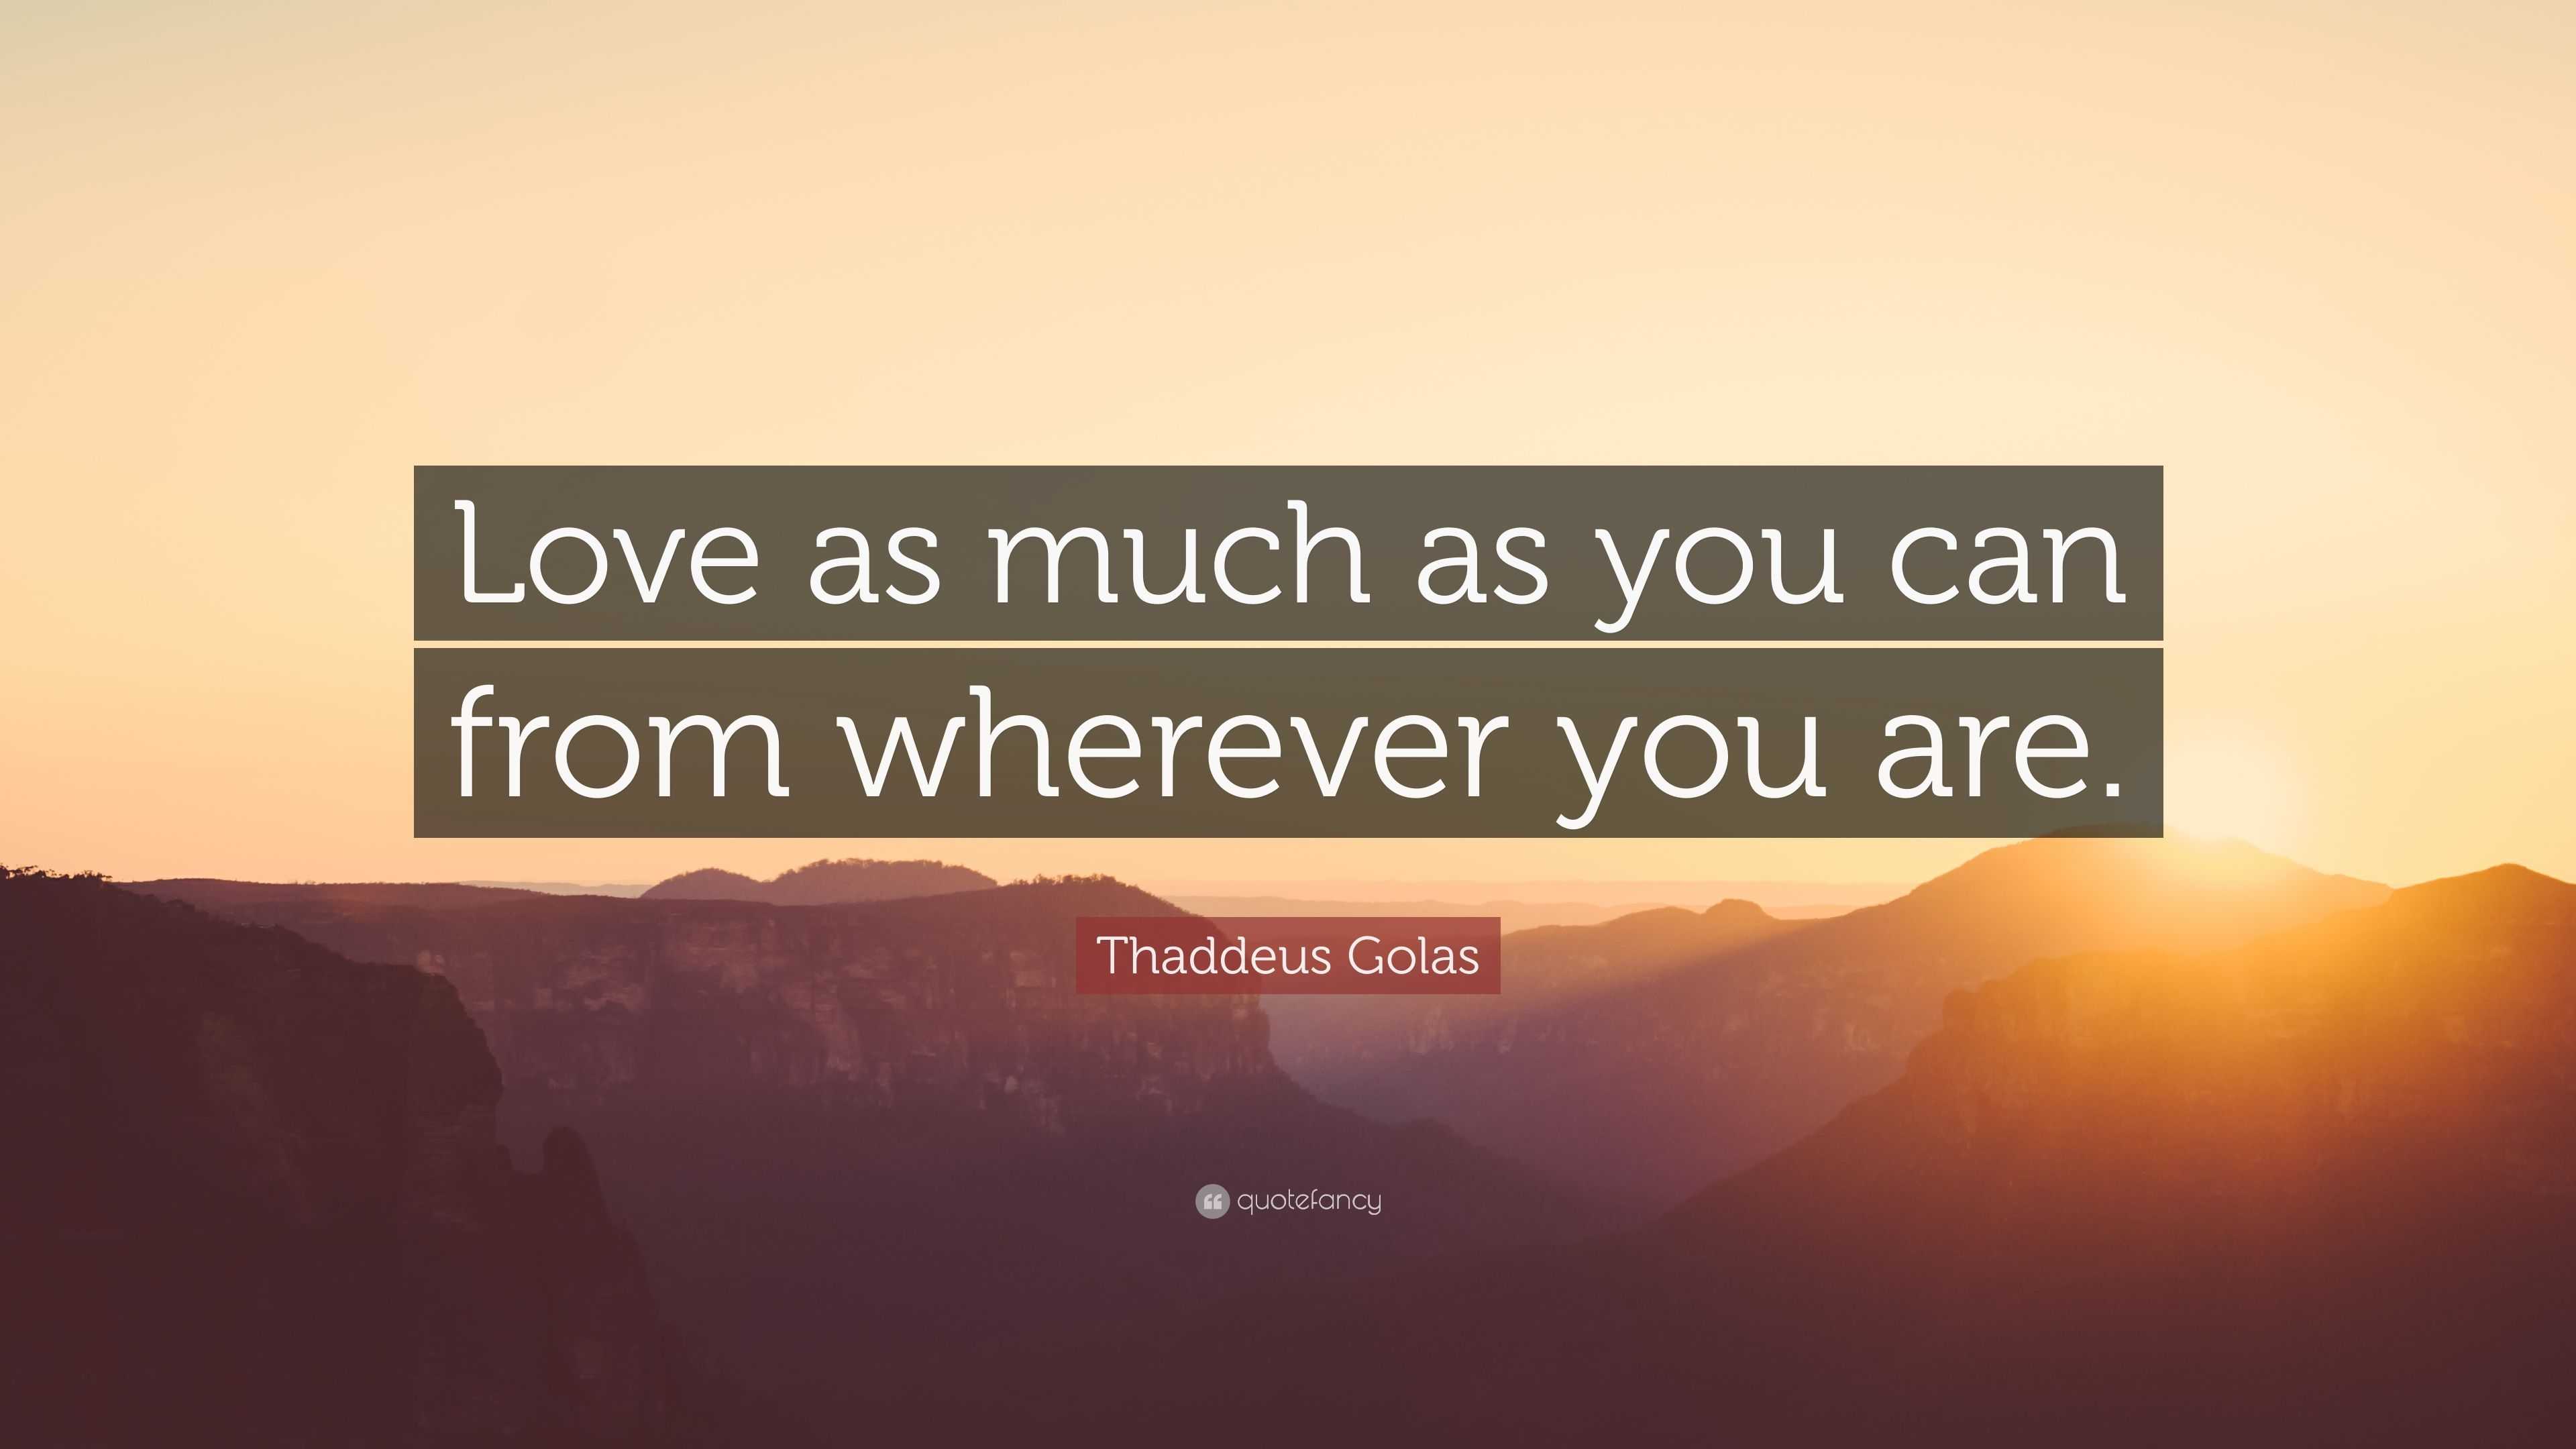 Thaddeus Golas Quote: “Love as much as you can from wherever you are.”